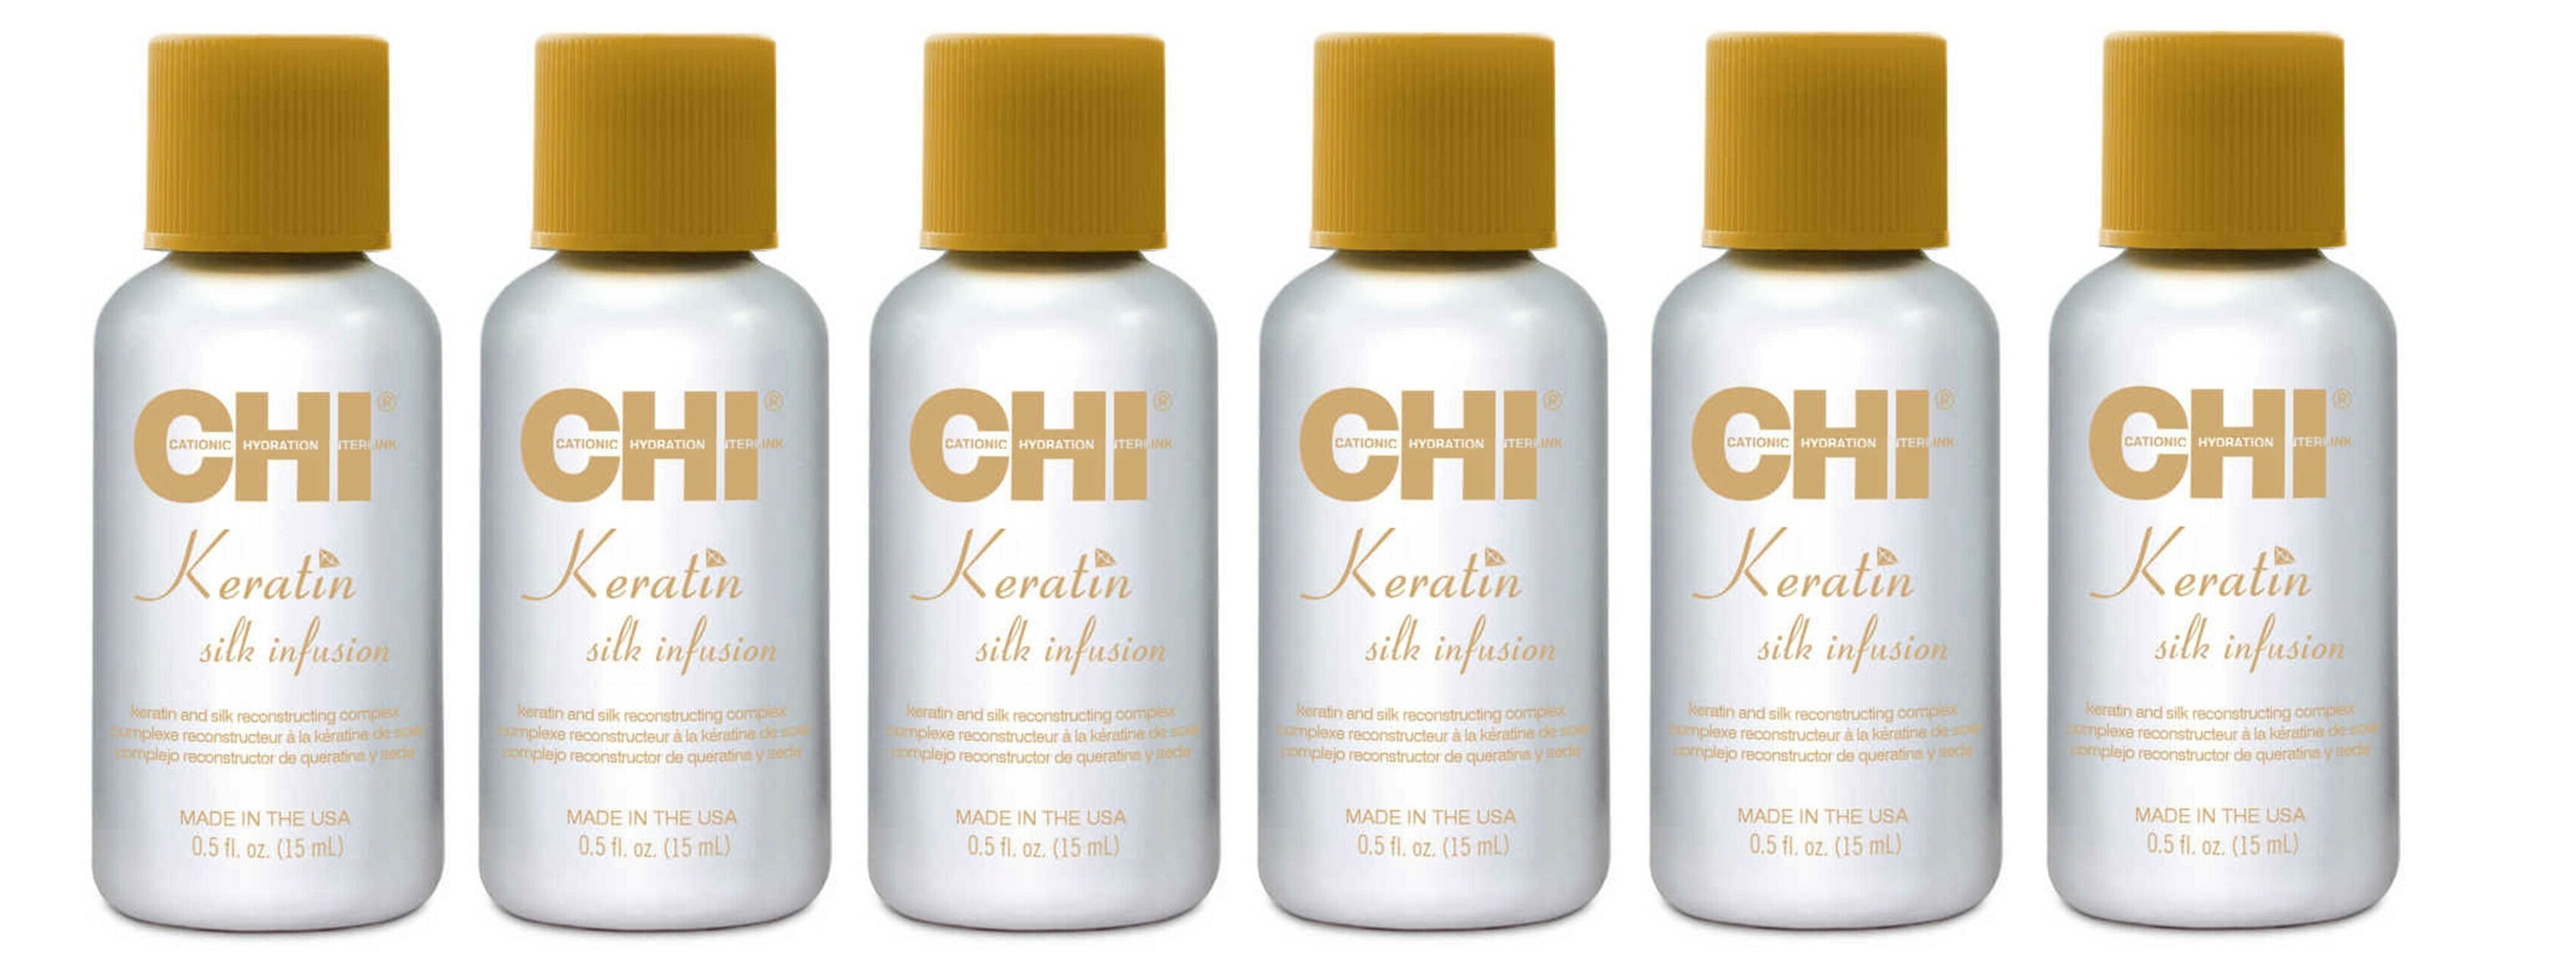 CHI Keratin Silk Infusion, 0.5oz (Pack of 6) 0.5 Ounce (Pack of 6) - image 1 of 3